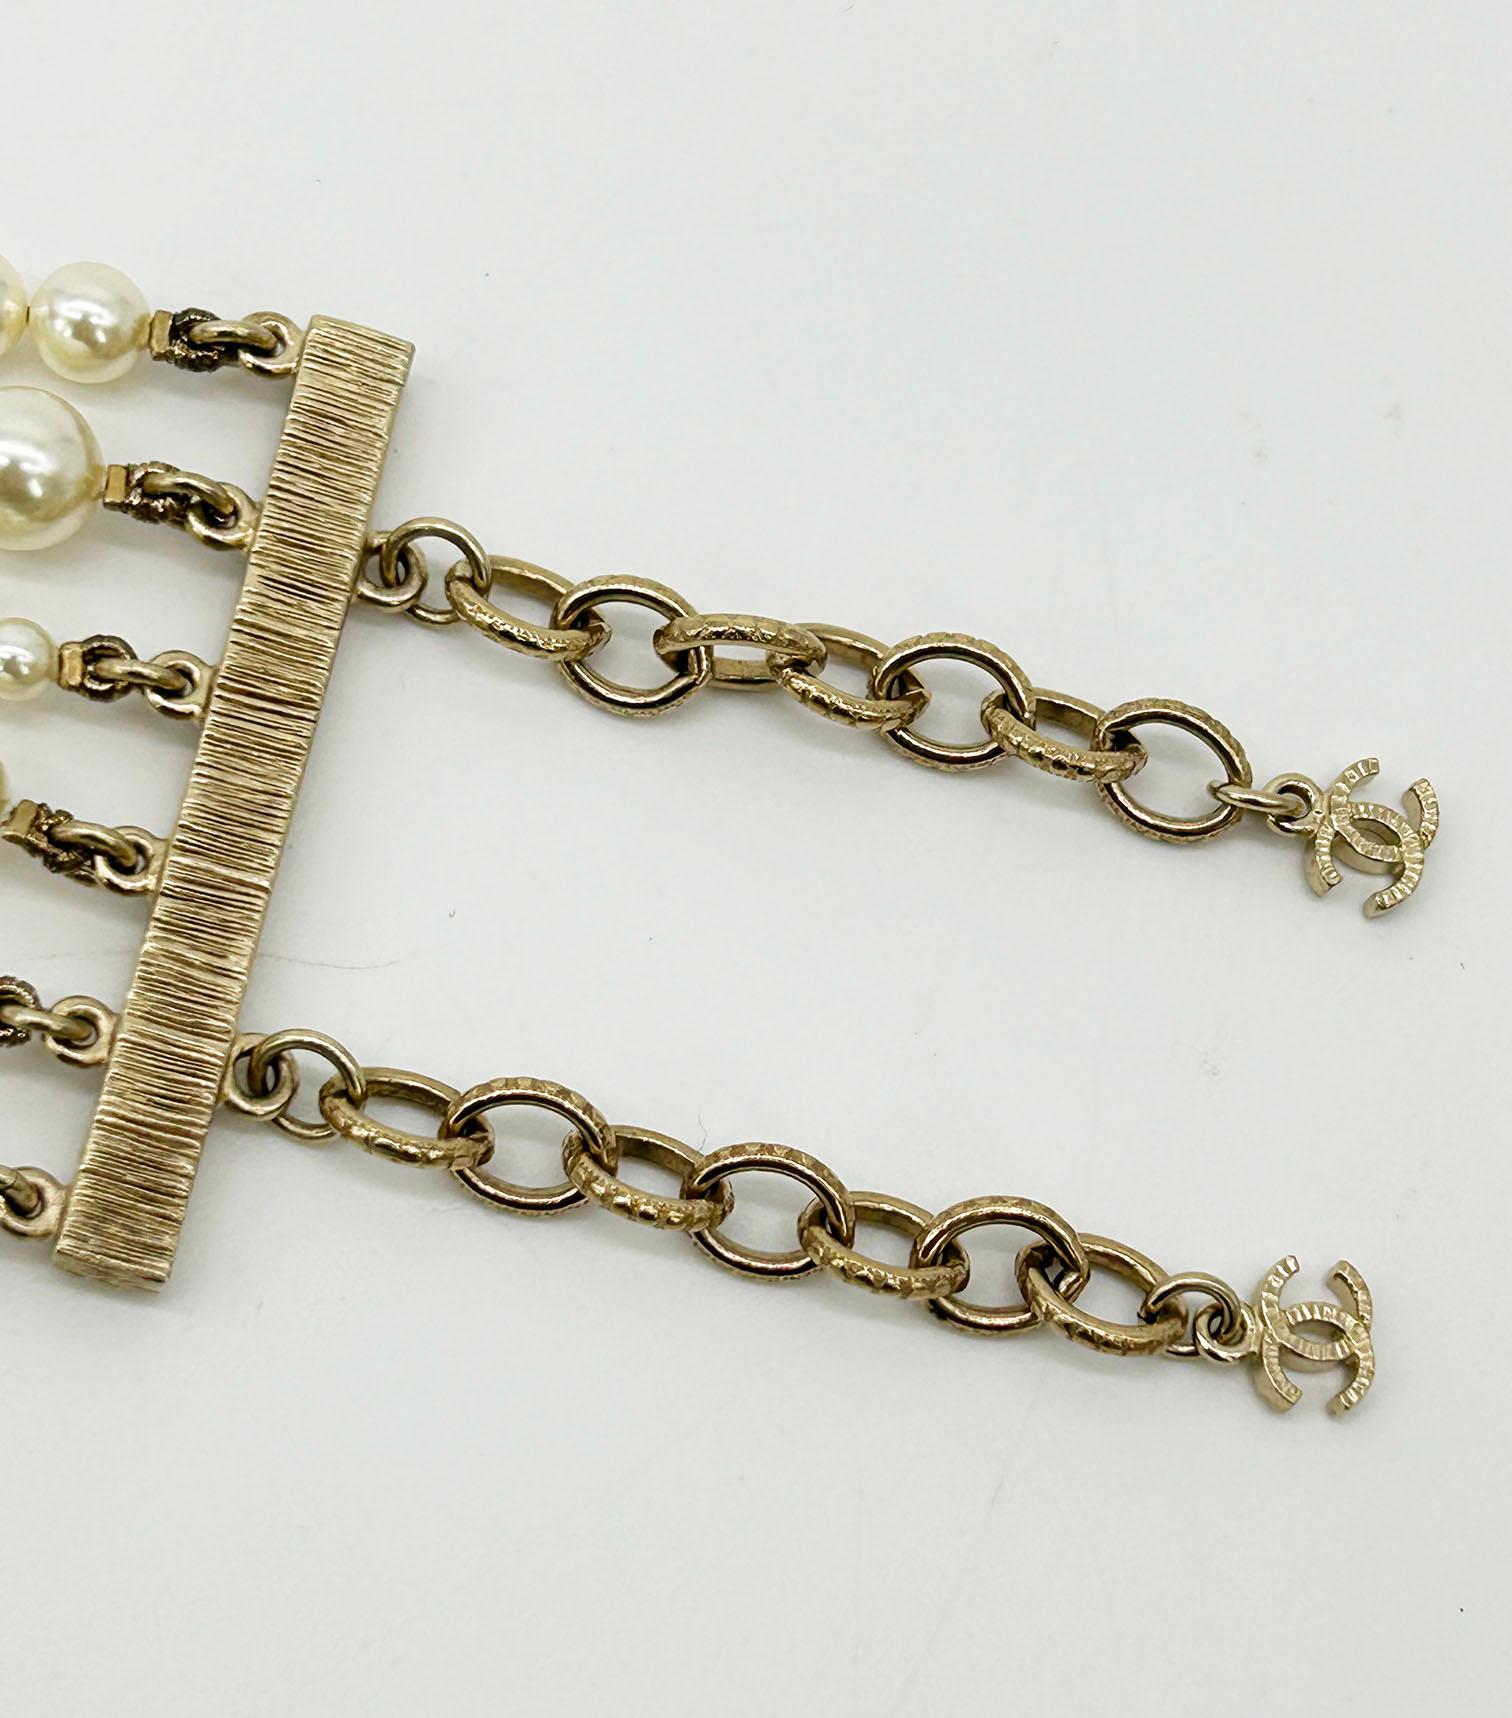 Chanel Pearl Strand Charm Bracelet In Excellent Condition For Sale In Philadelphia, PA